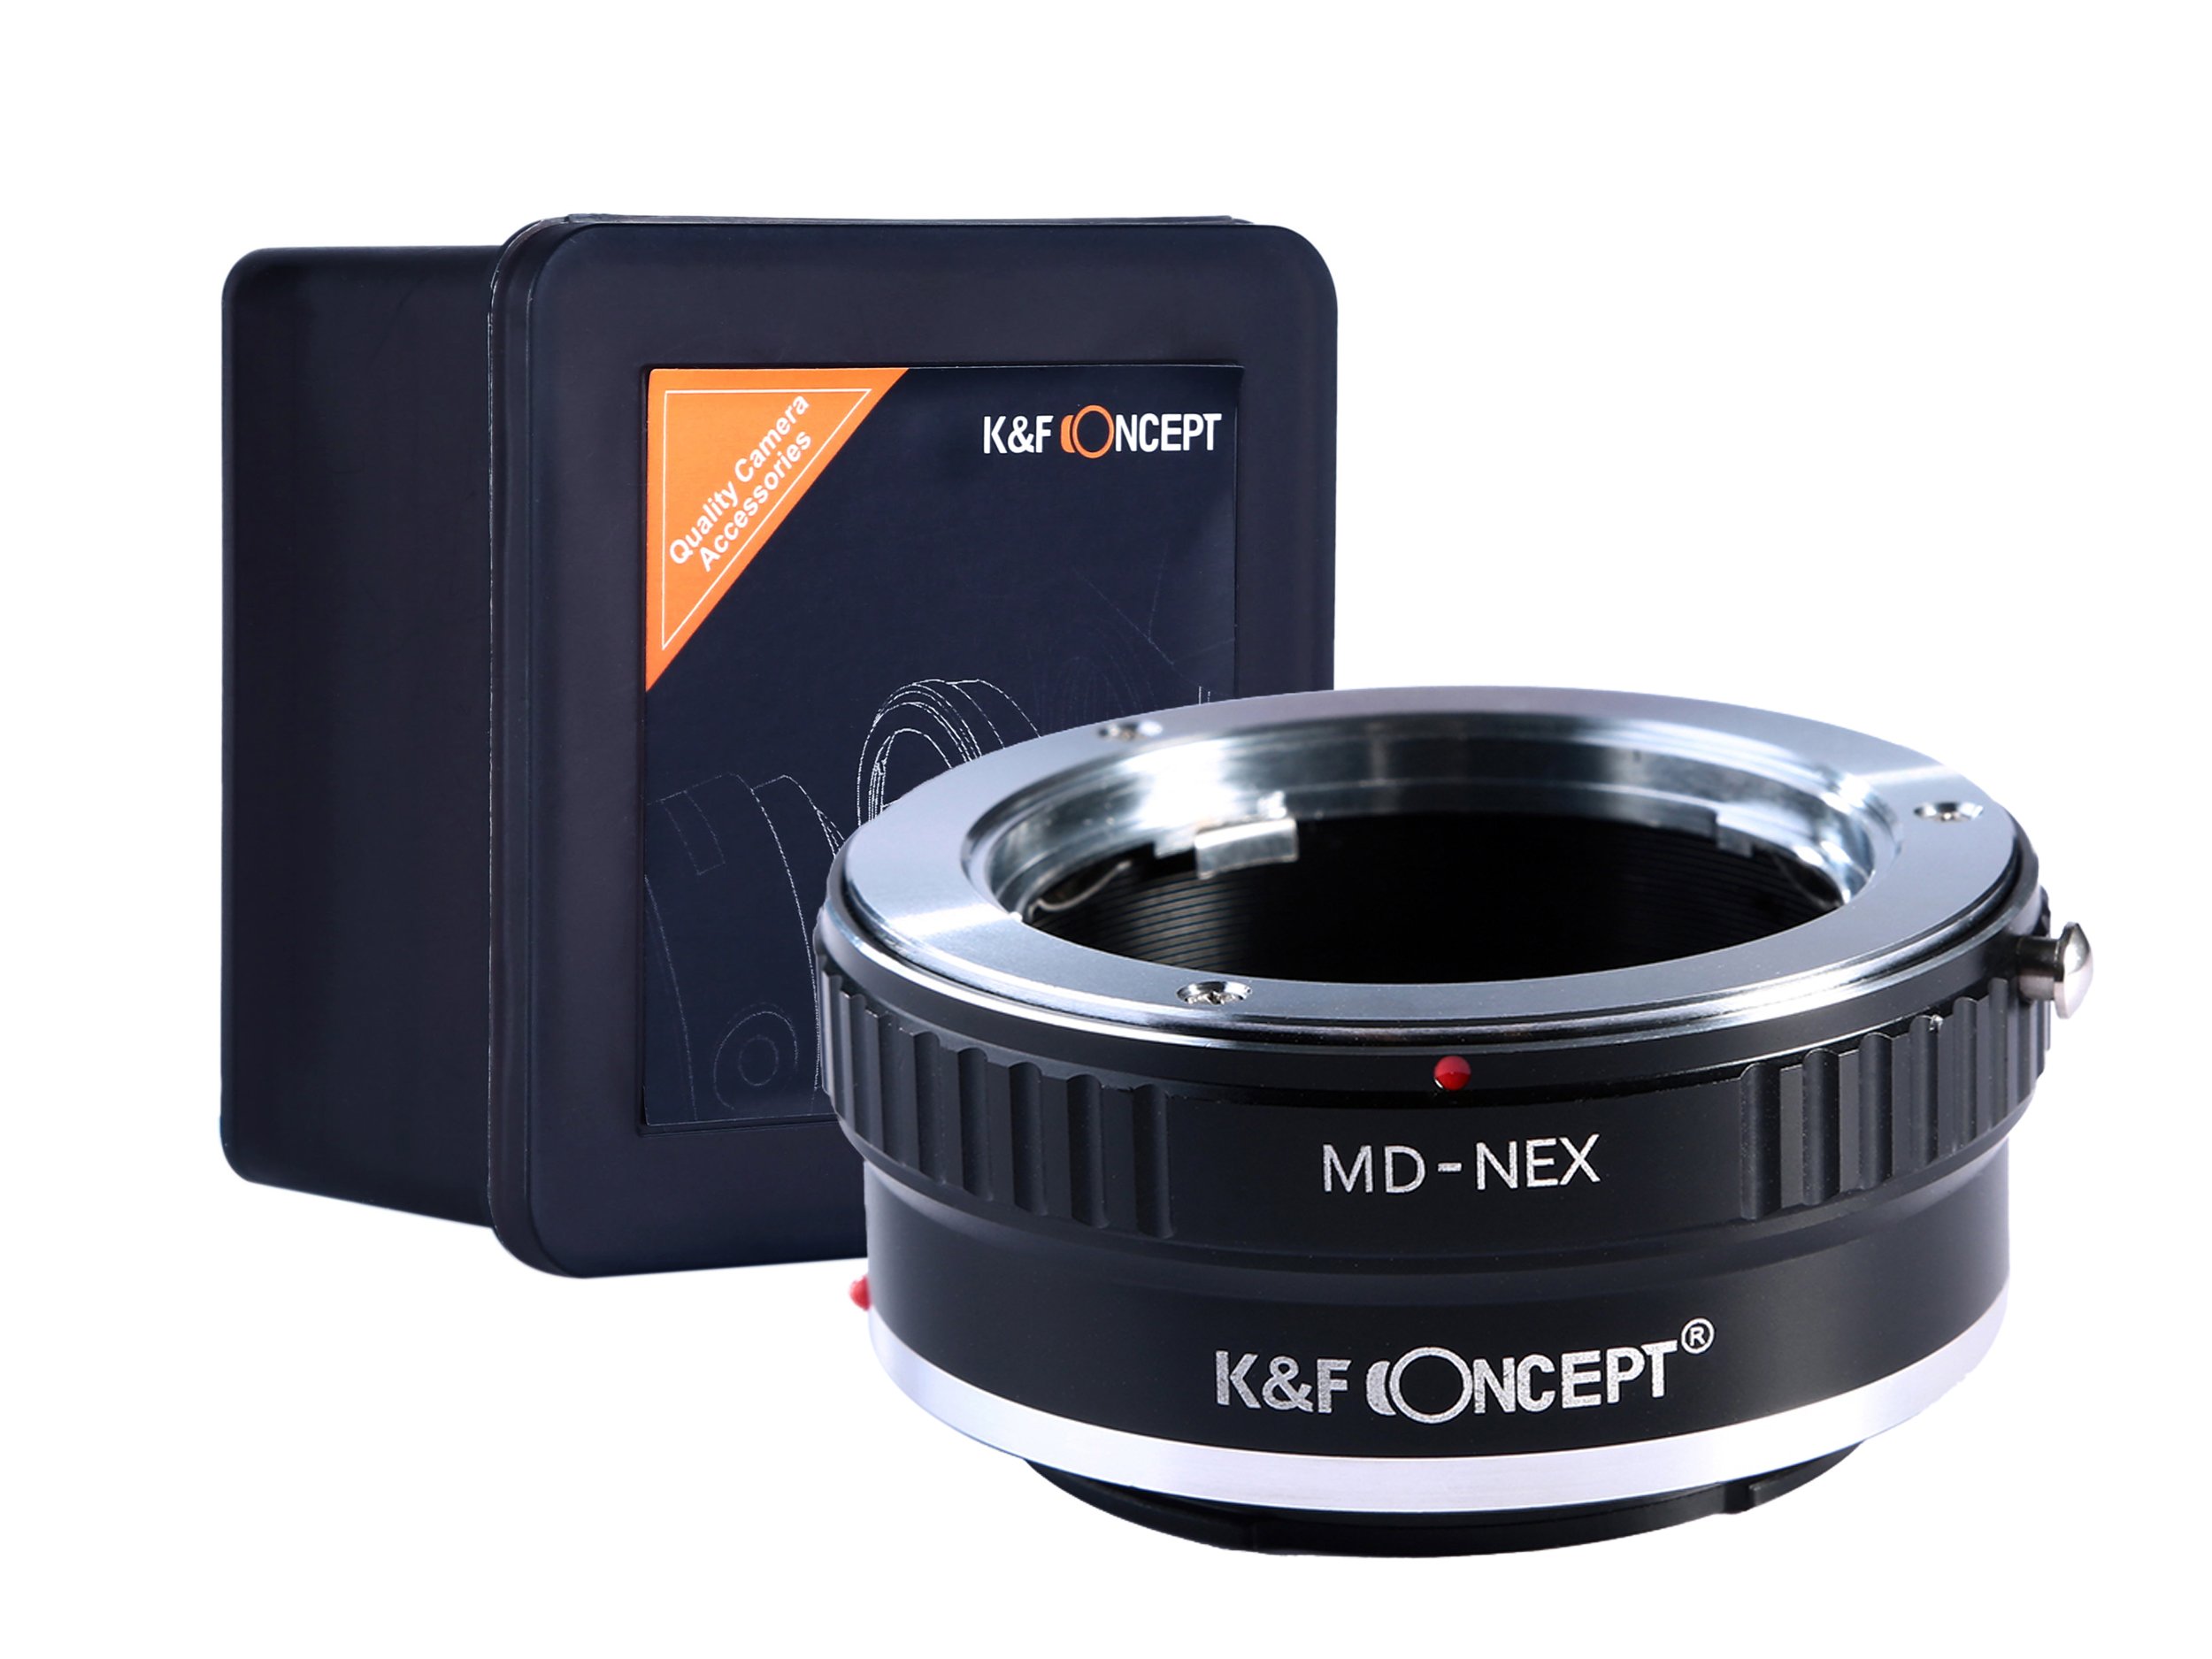 K & F CONCEPT Ð°Ð´Ð°Ð¿Ñ‚ÐµÑ€ SONY E-MOUNT-MINOLTA MD